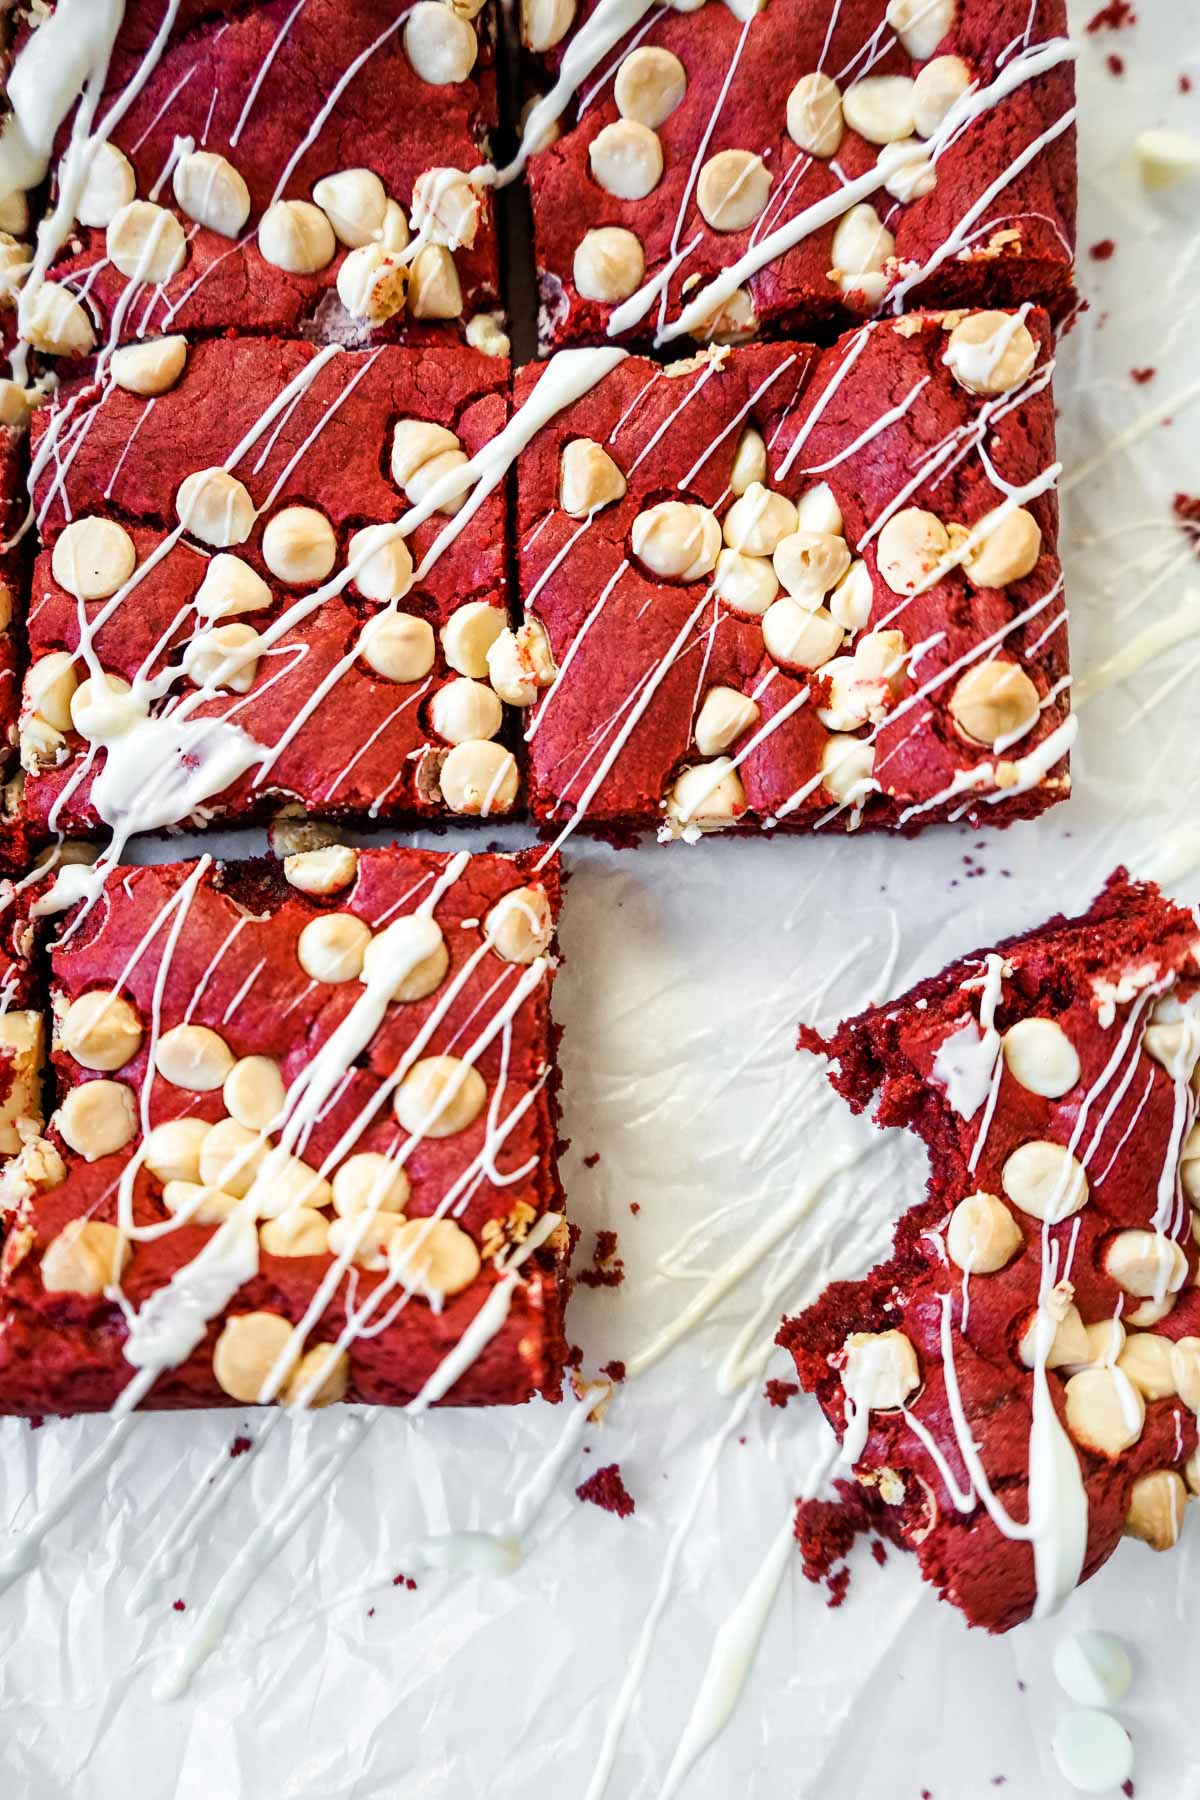 Red velvet brownies on a table with one piece with a bite taken out of it.